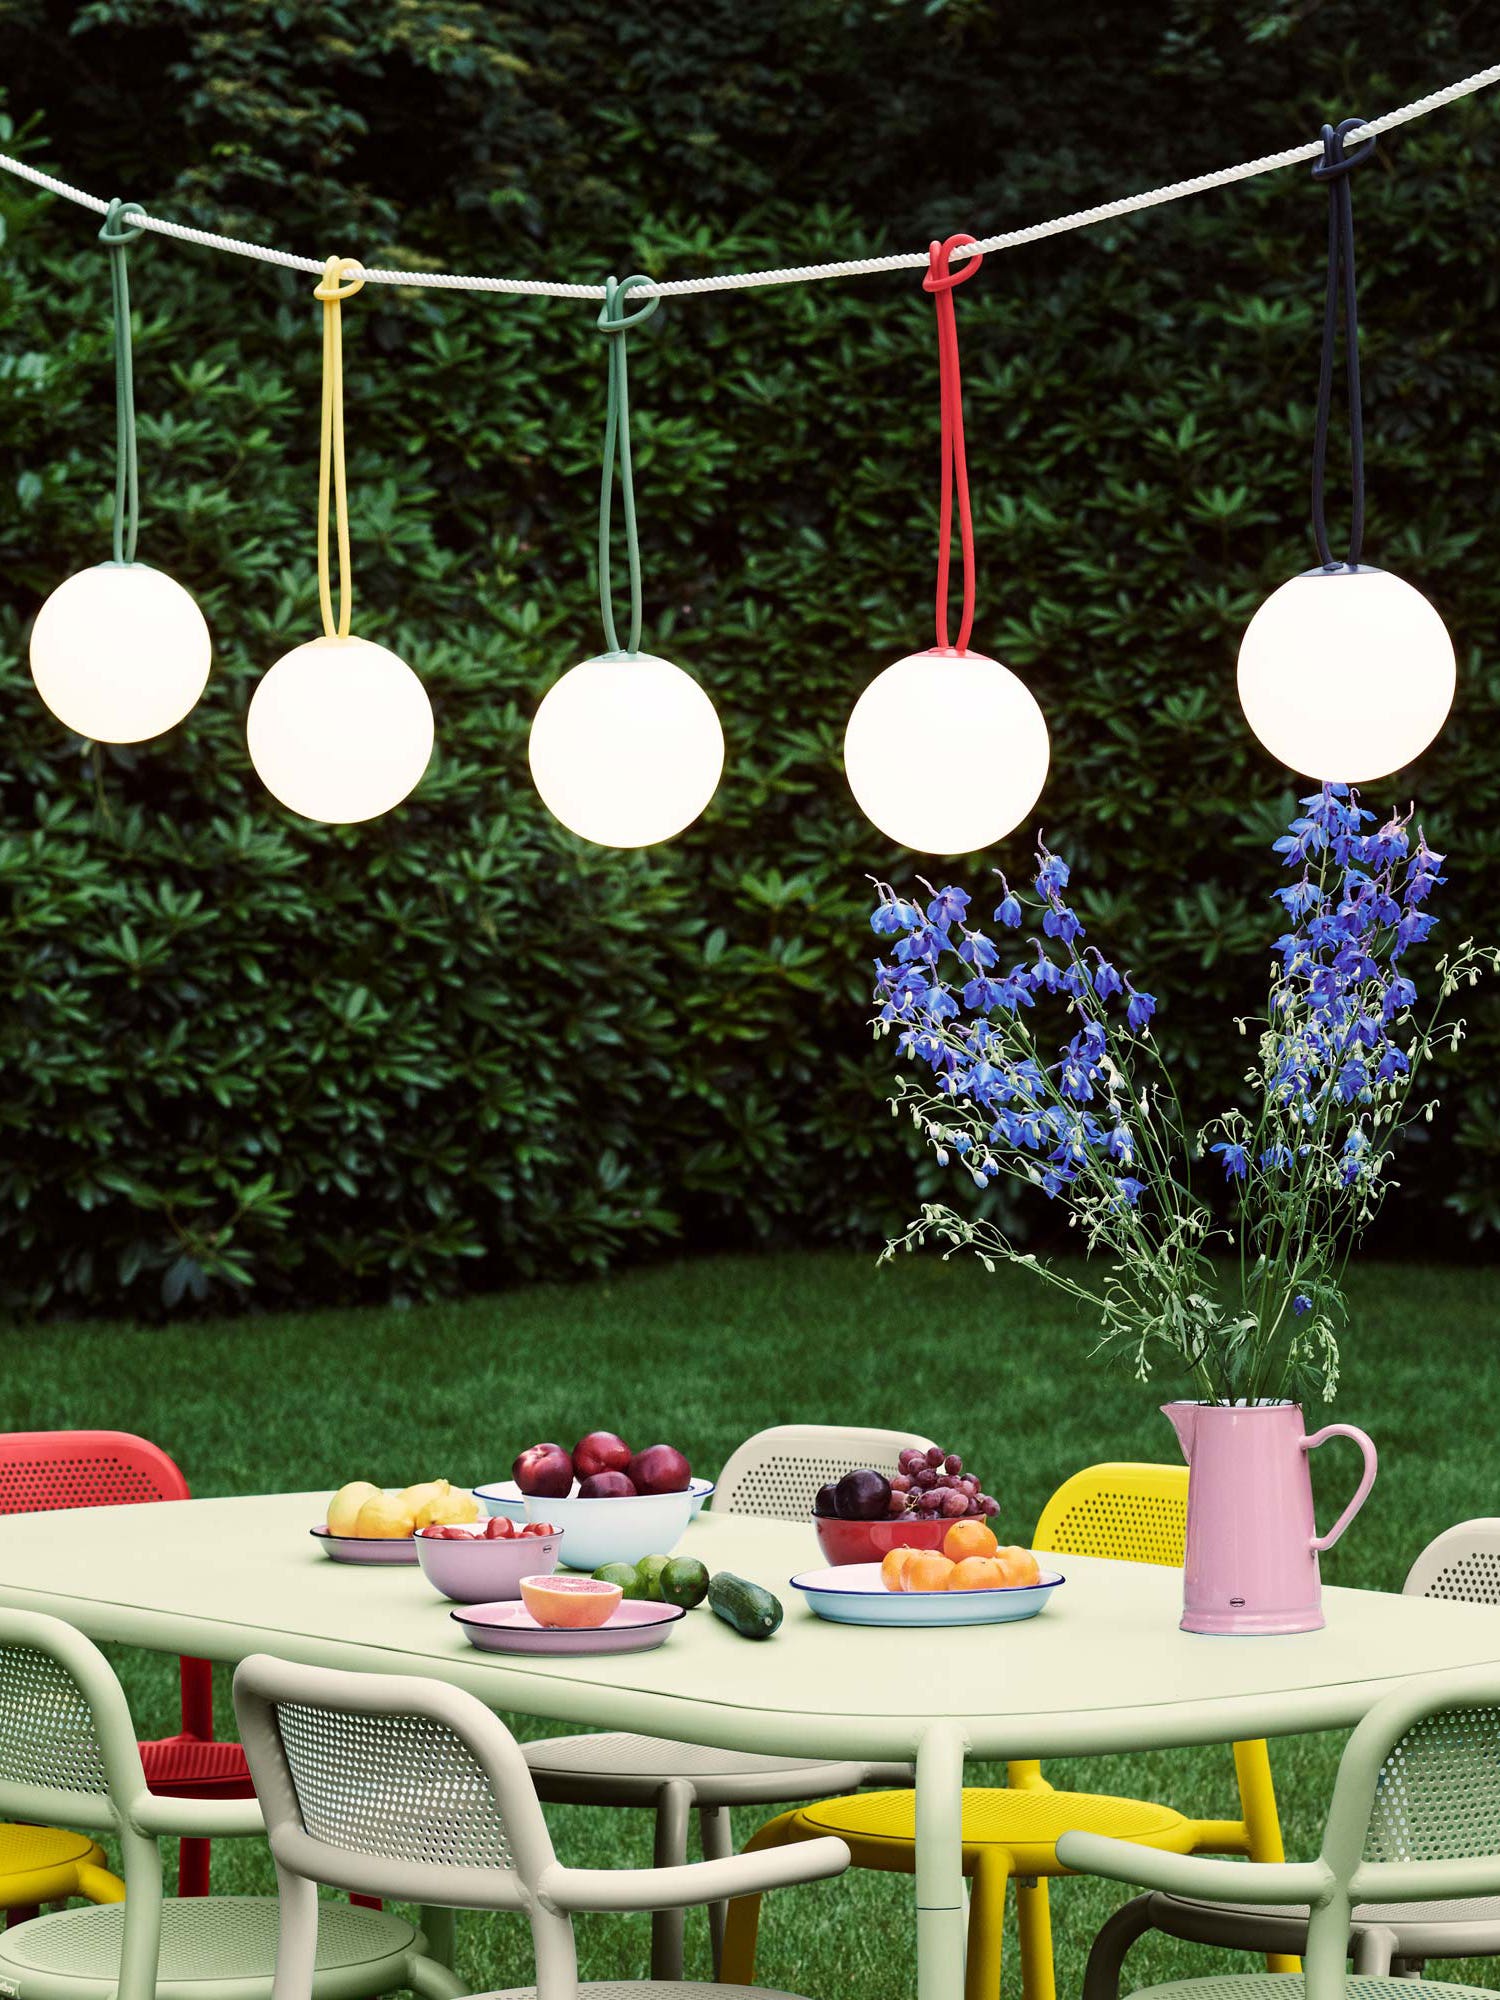 8 Rechargeable Lamps to Keep Your Outdoor Gatherings Going All Night Long